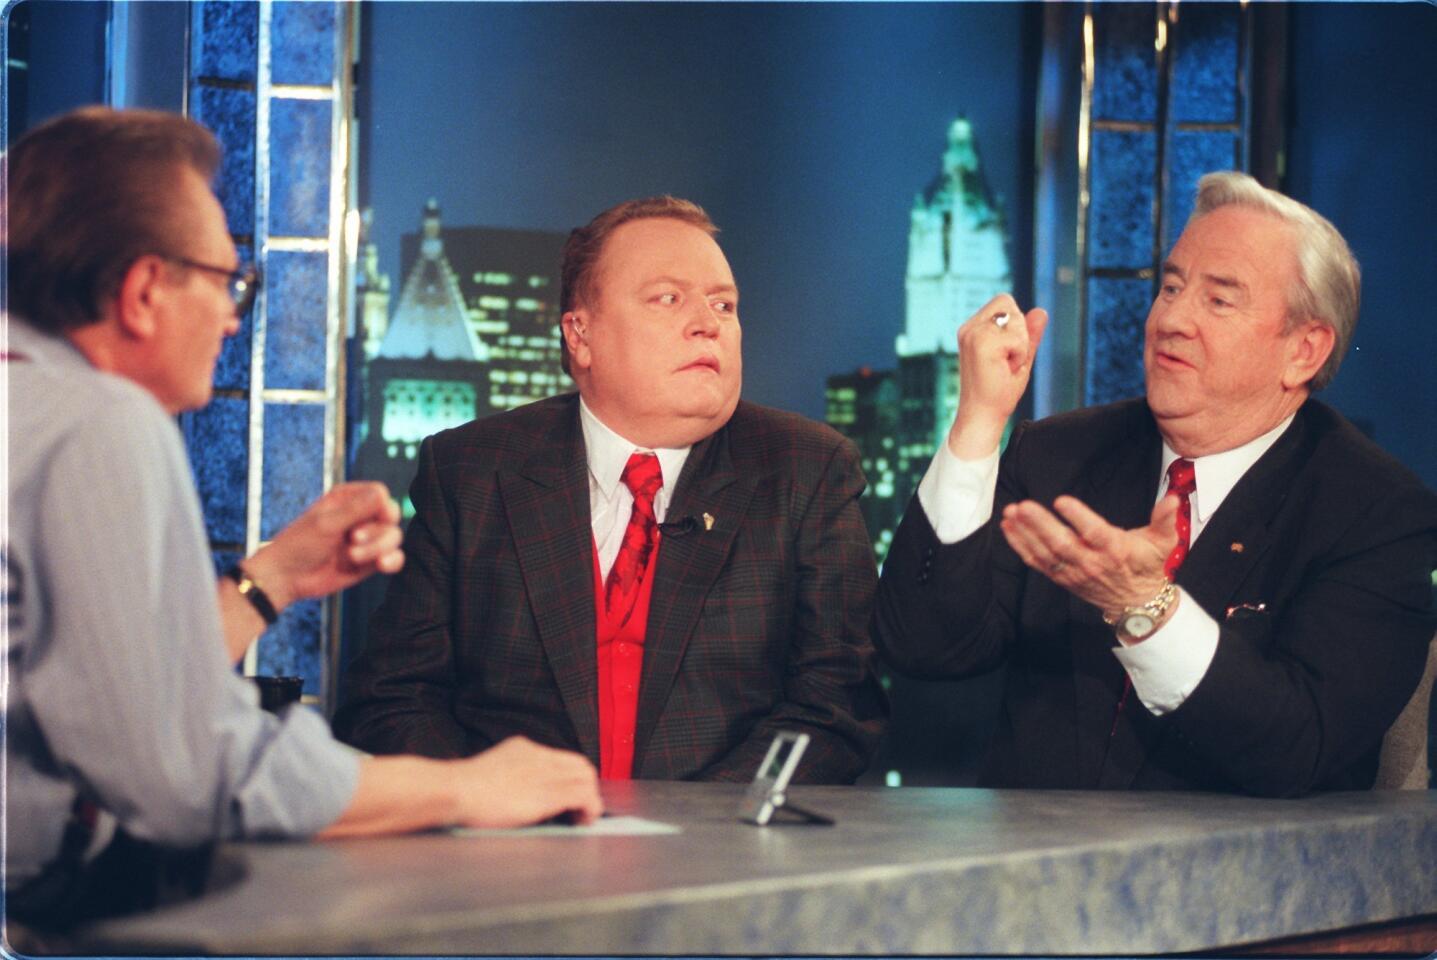 Jerry Falwell and Larry Flynt